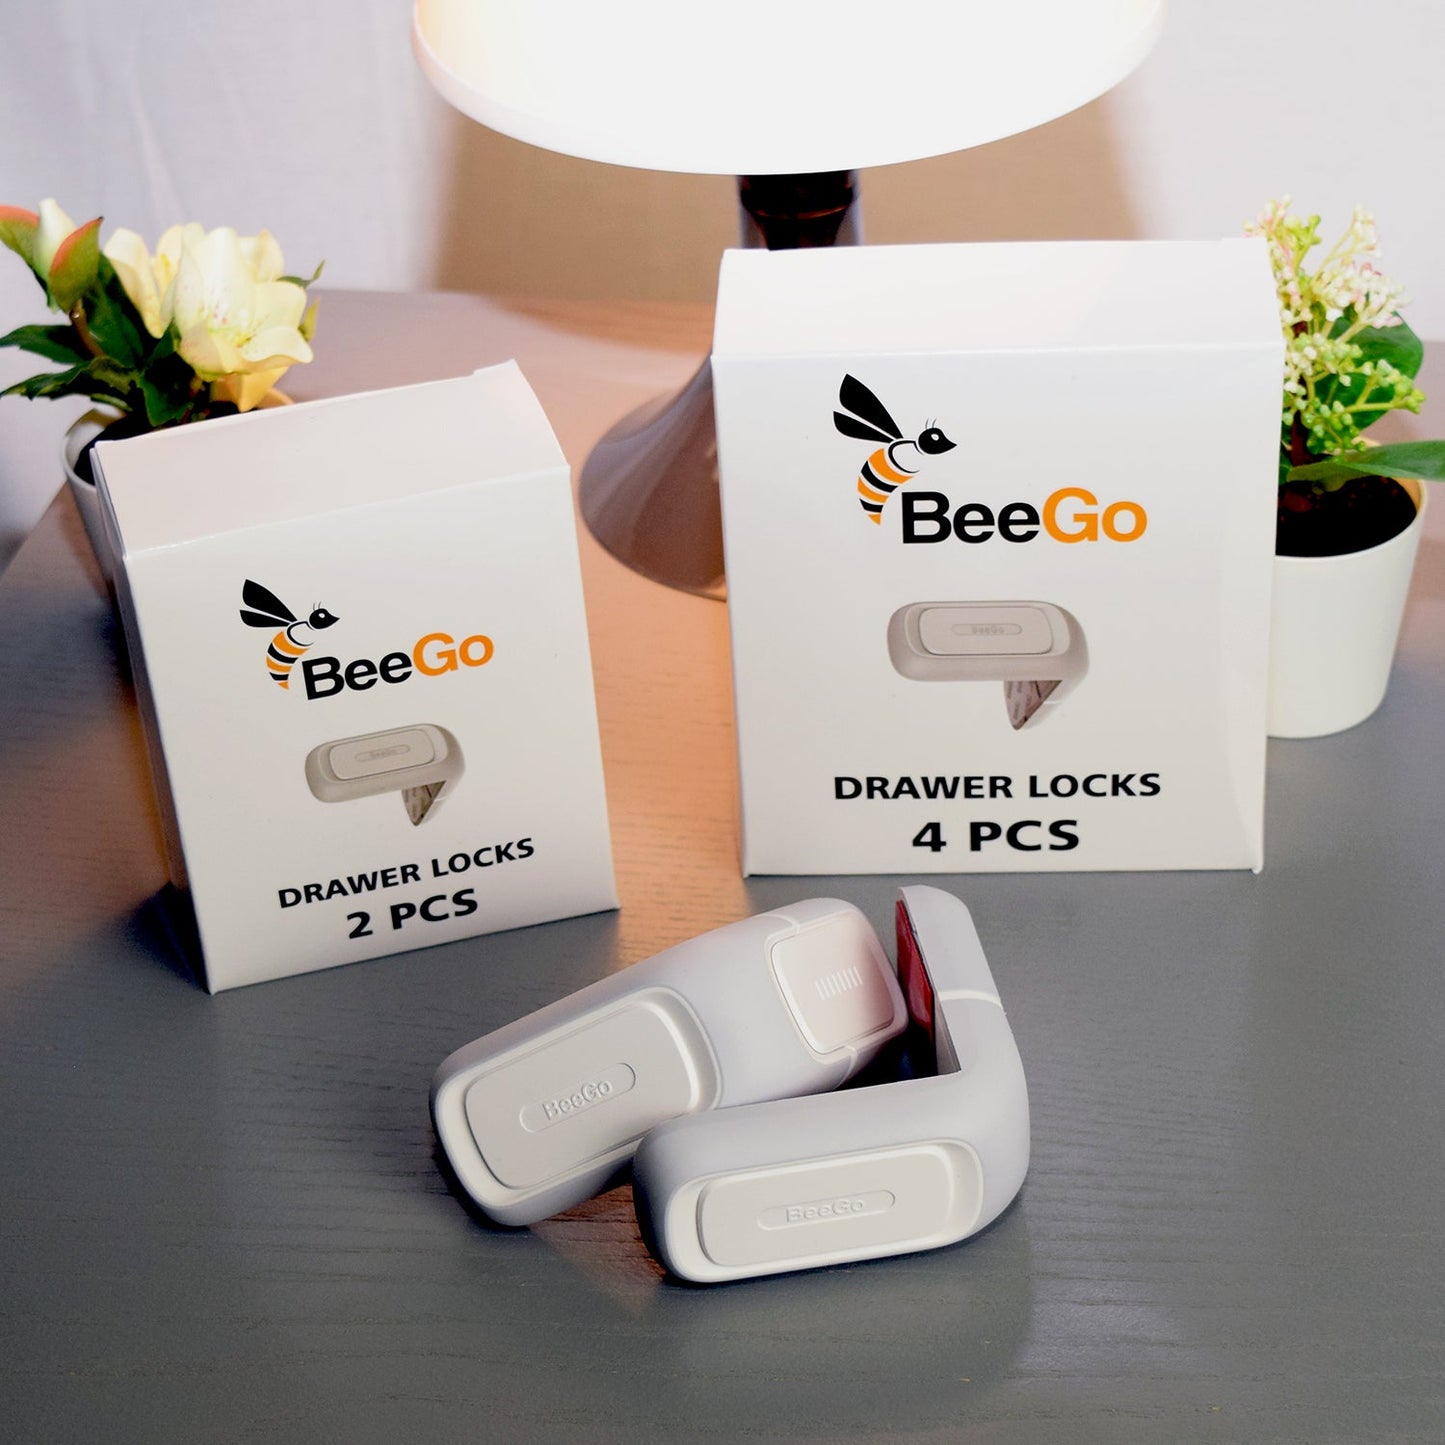 BeeGo Drawer Locks - Beego Child Safety Products